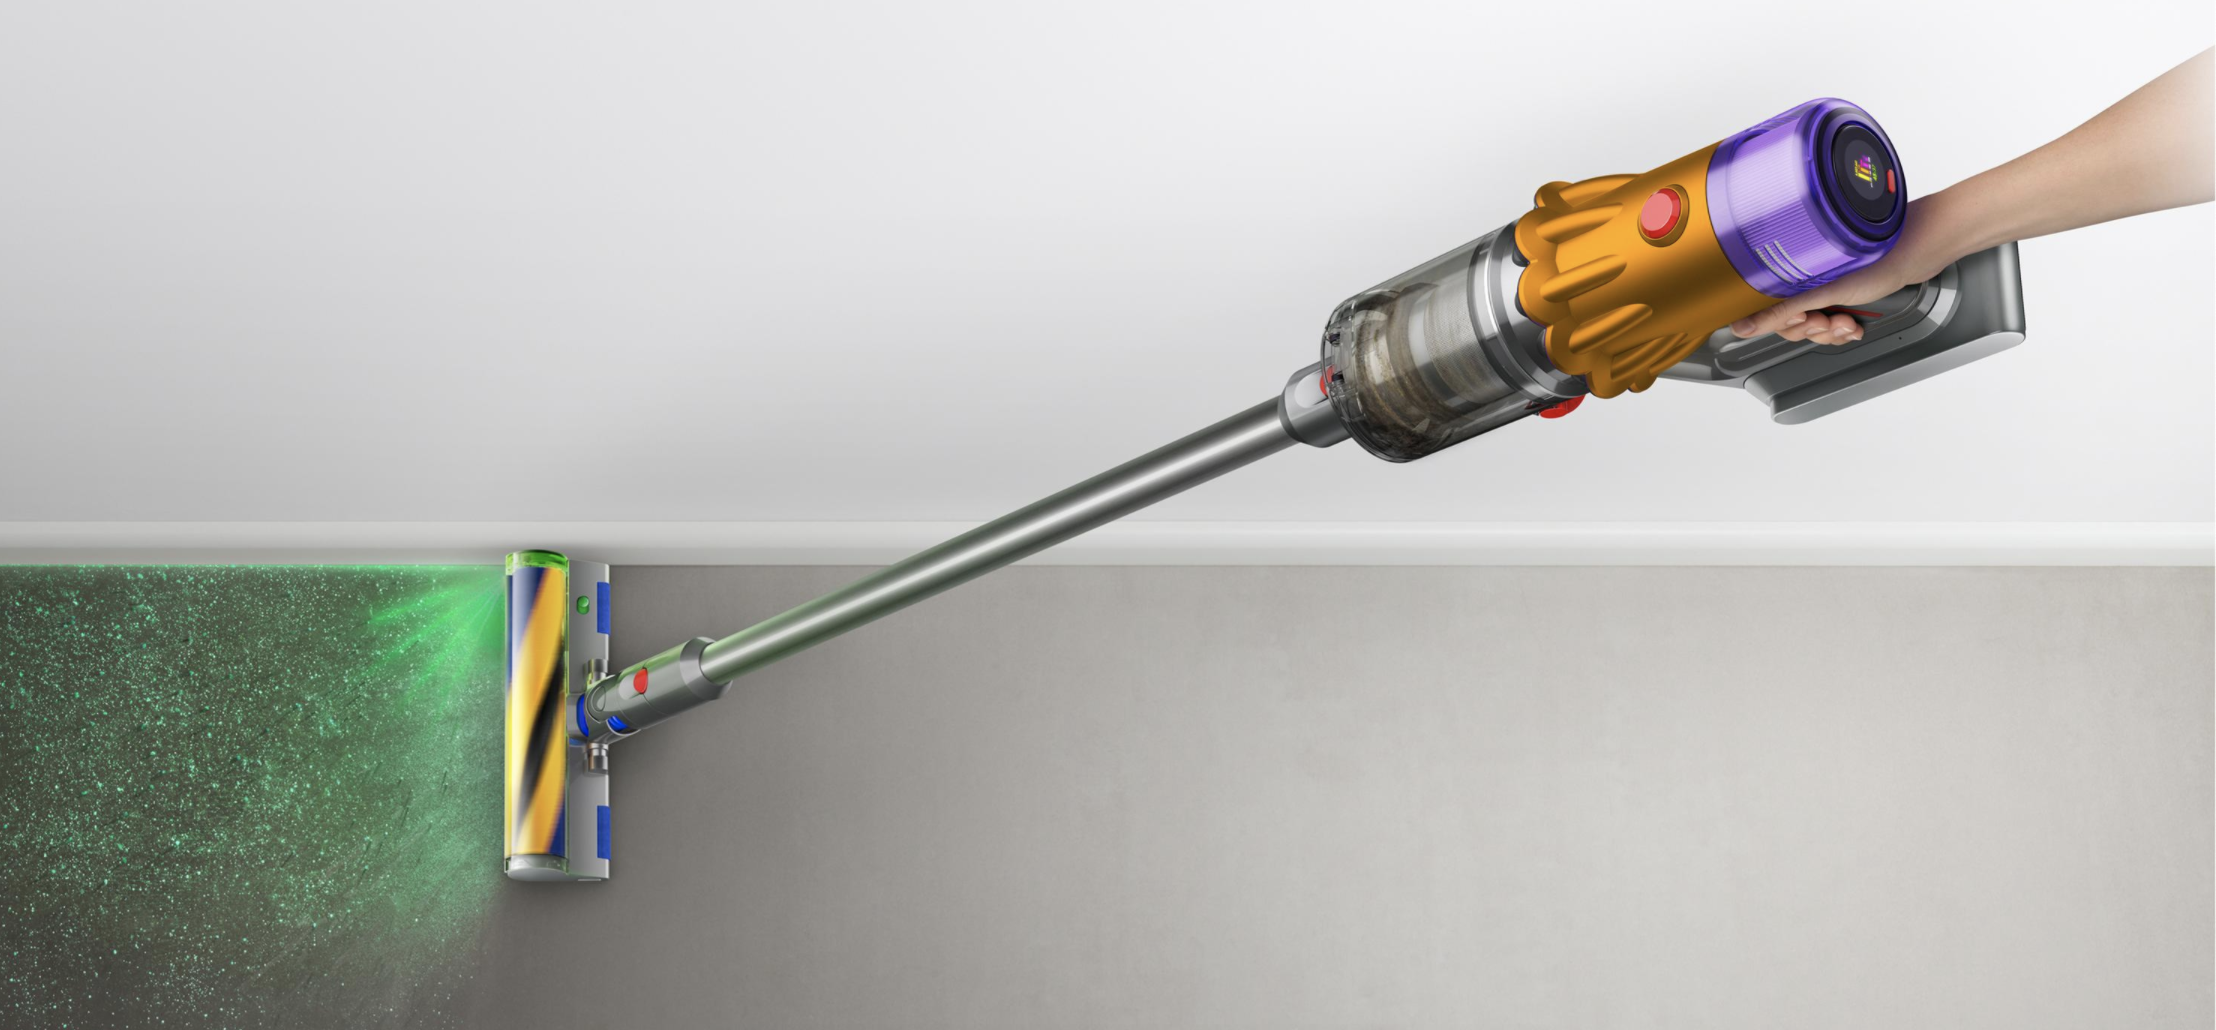 karakterisere trådløs involveret The Dyson V12 Vacuum: What We Know About Its Price & Features